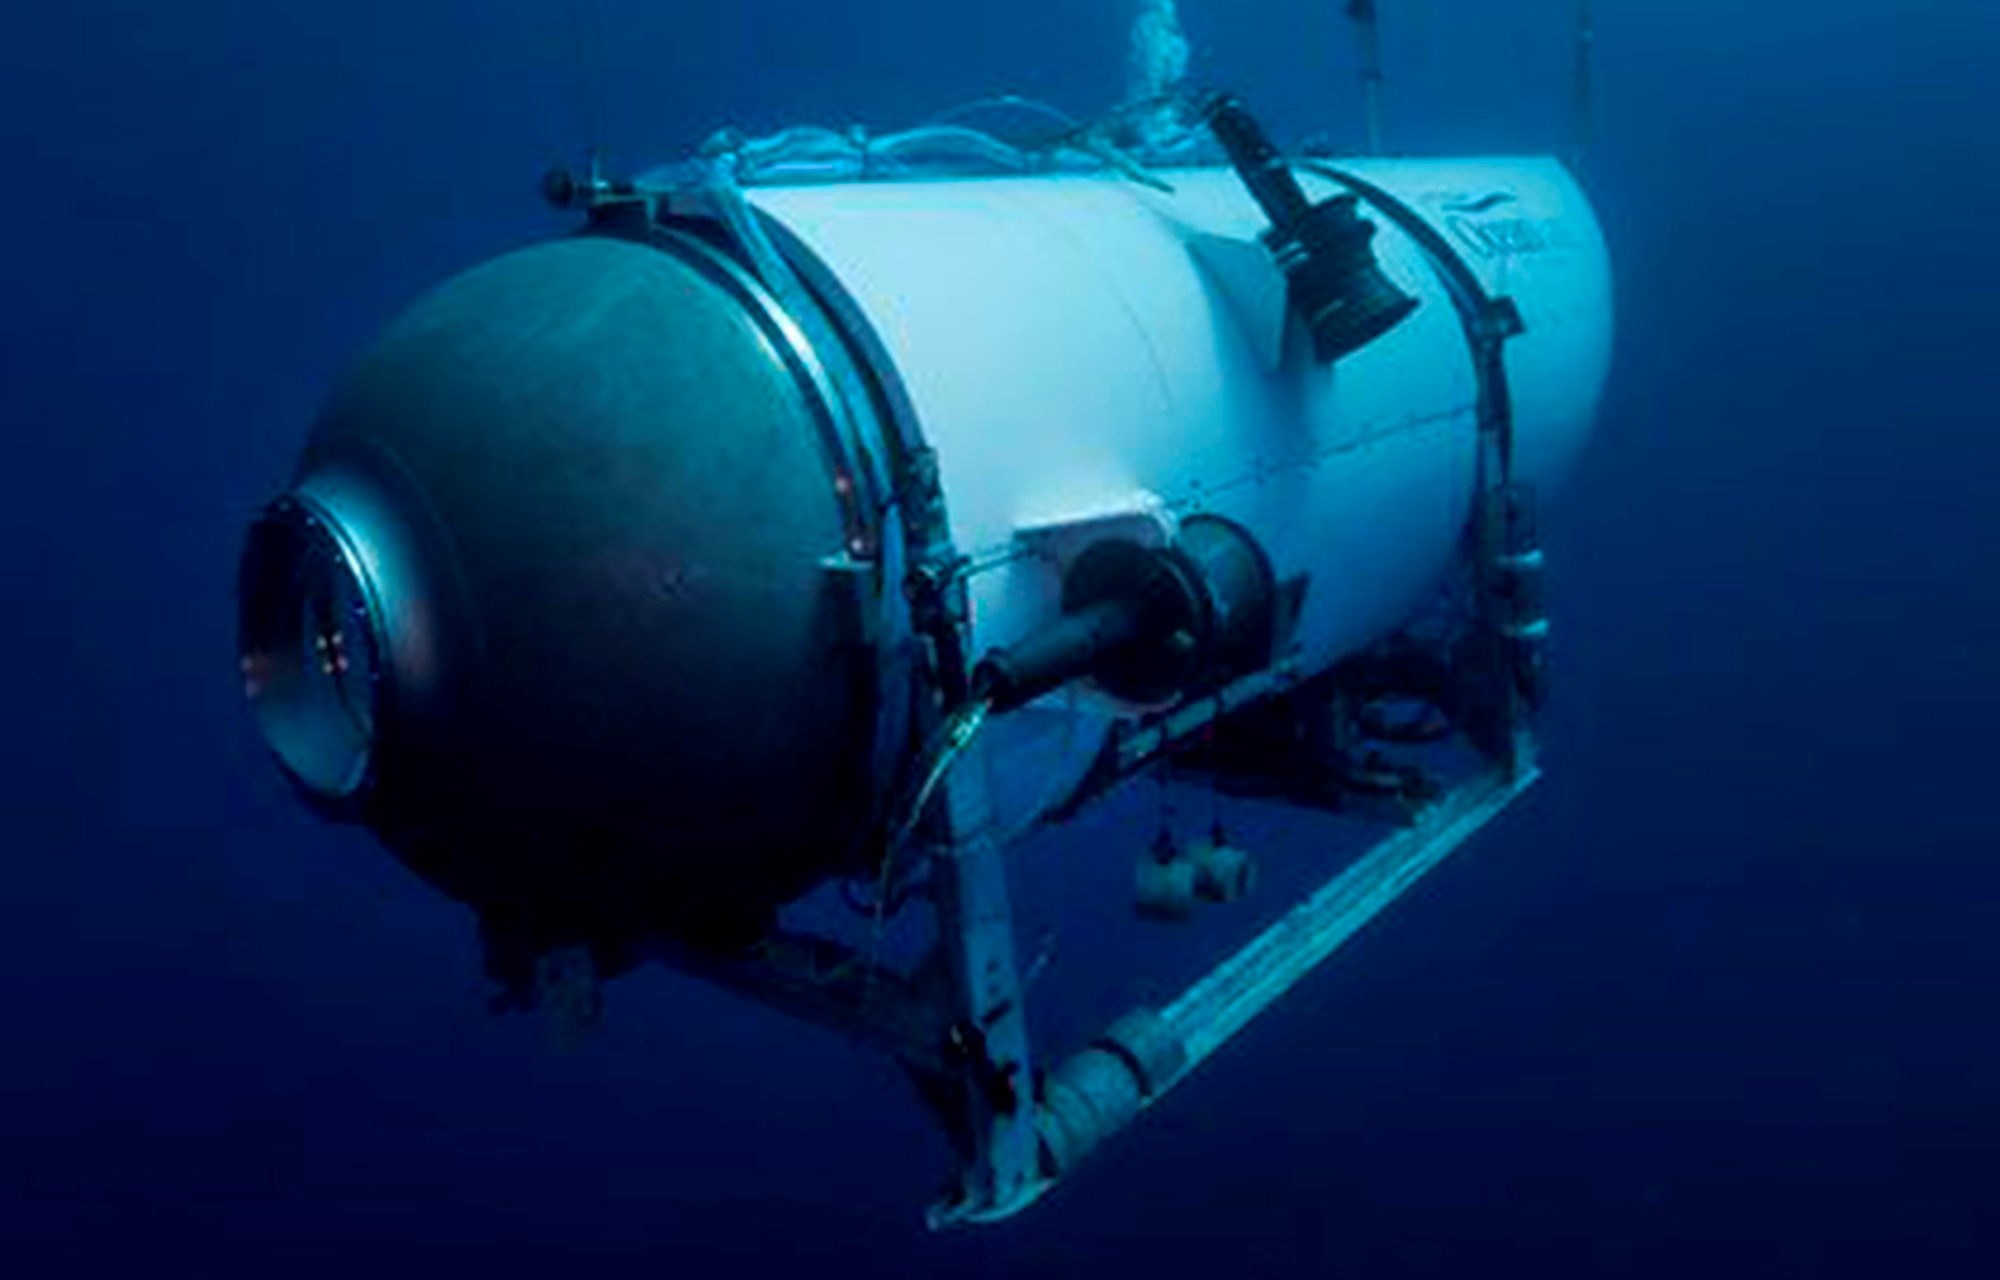 Tech: This is how they could save the Titan’s crew if they could find the submarine